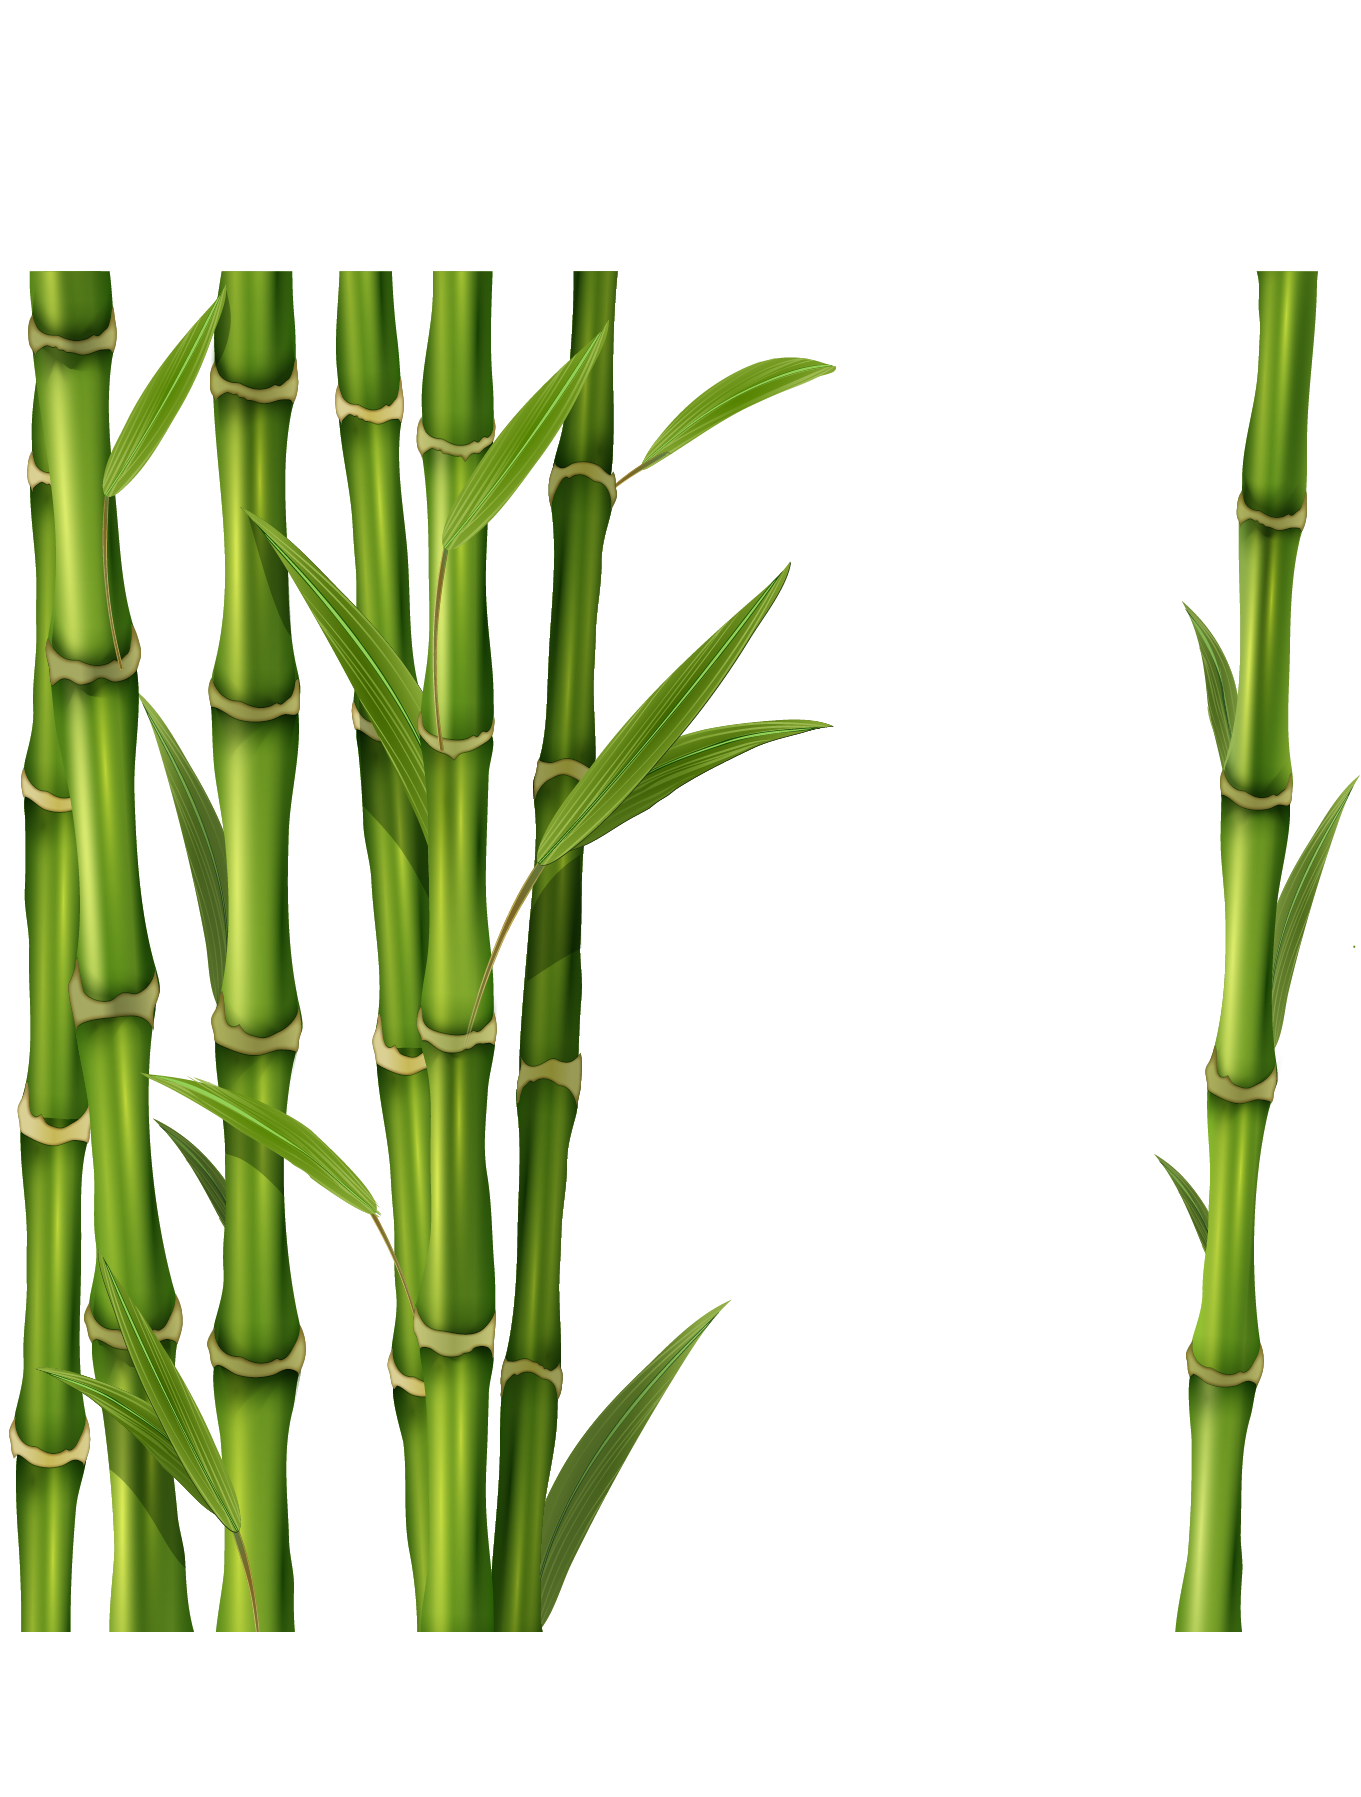 Bamboo Stem PNG Image Background